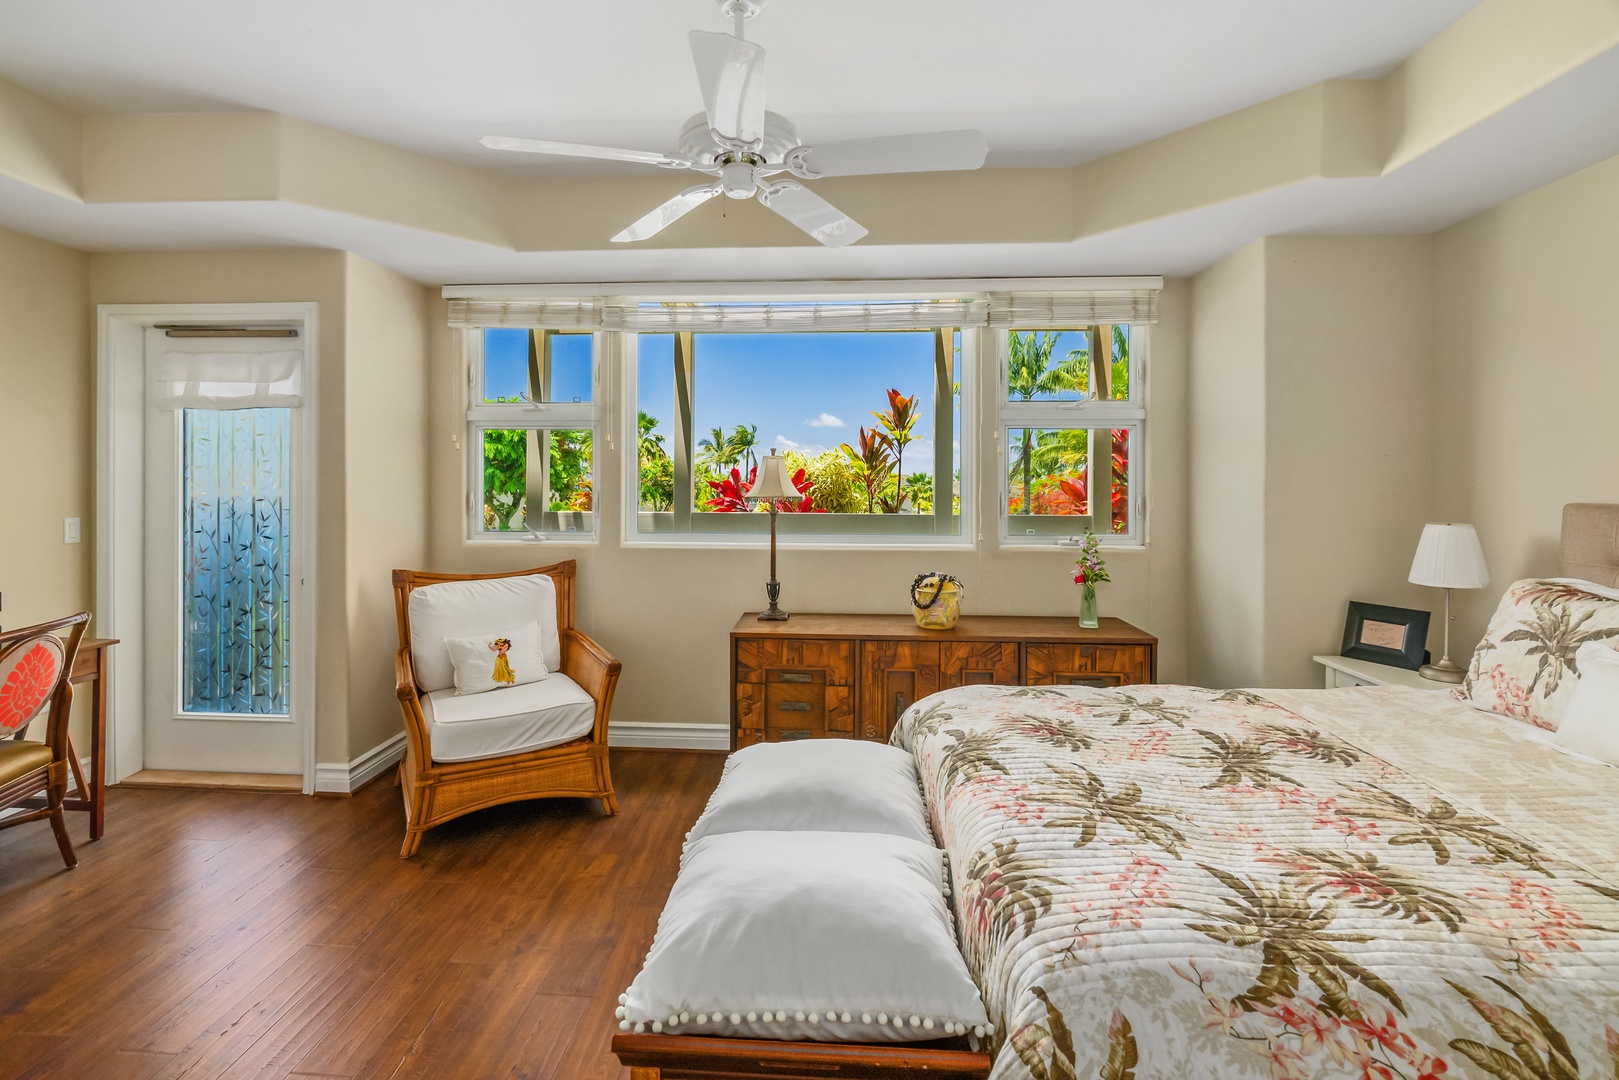 Princeville Vacation Rentals, Noelani Kai - Lower level suite with plush bed and luxury linens, and private lanai offering a glimpse of the enchanting ocean.